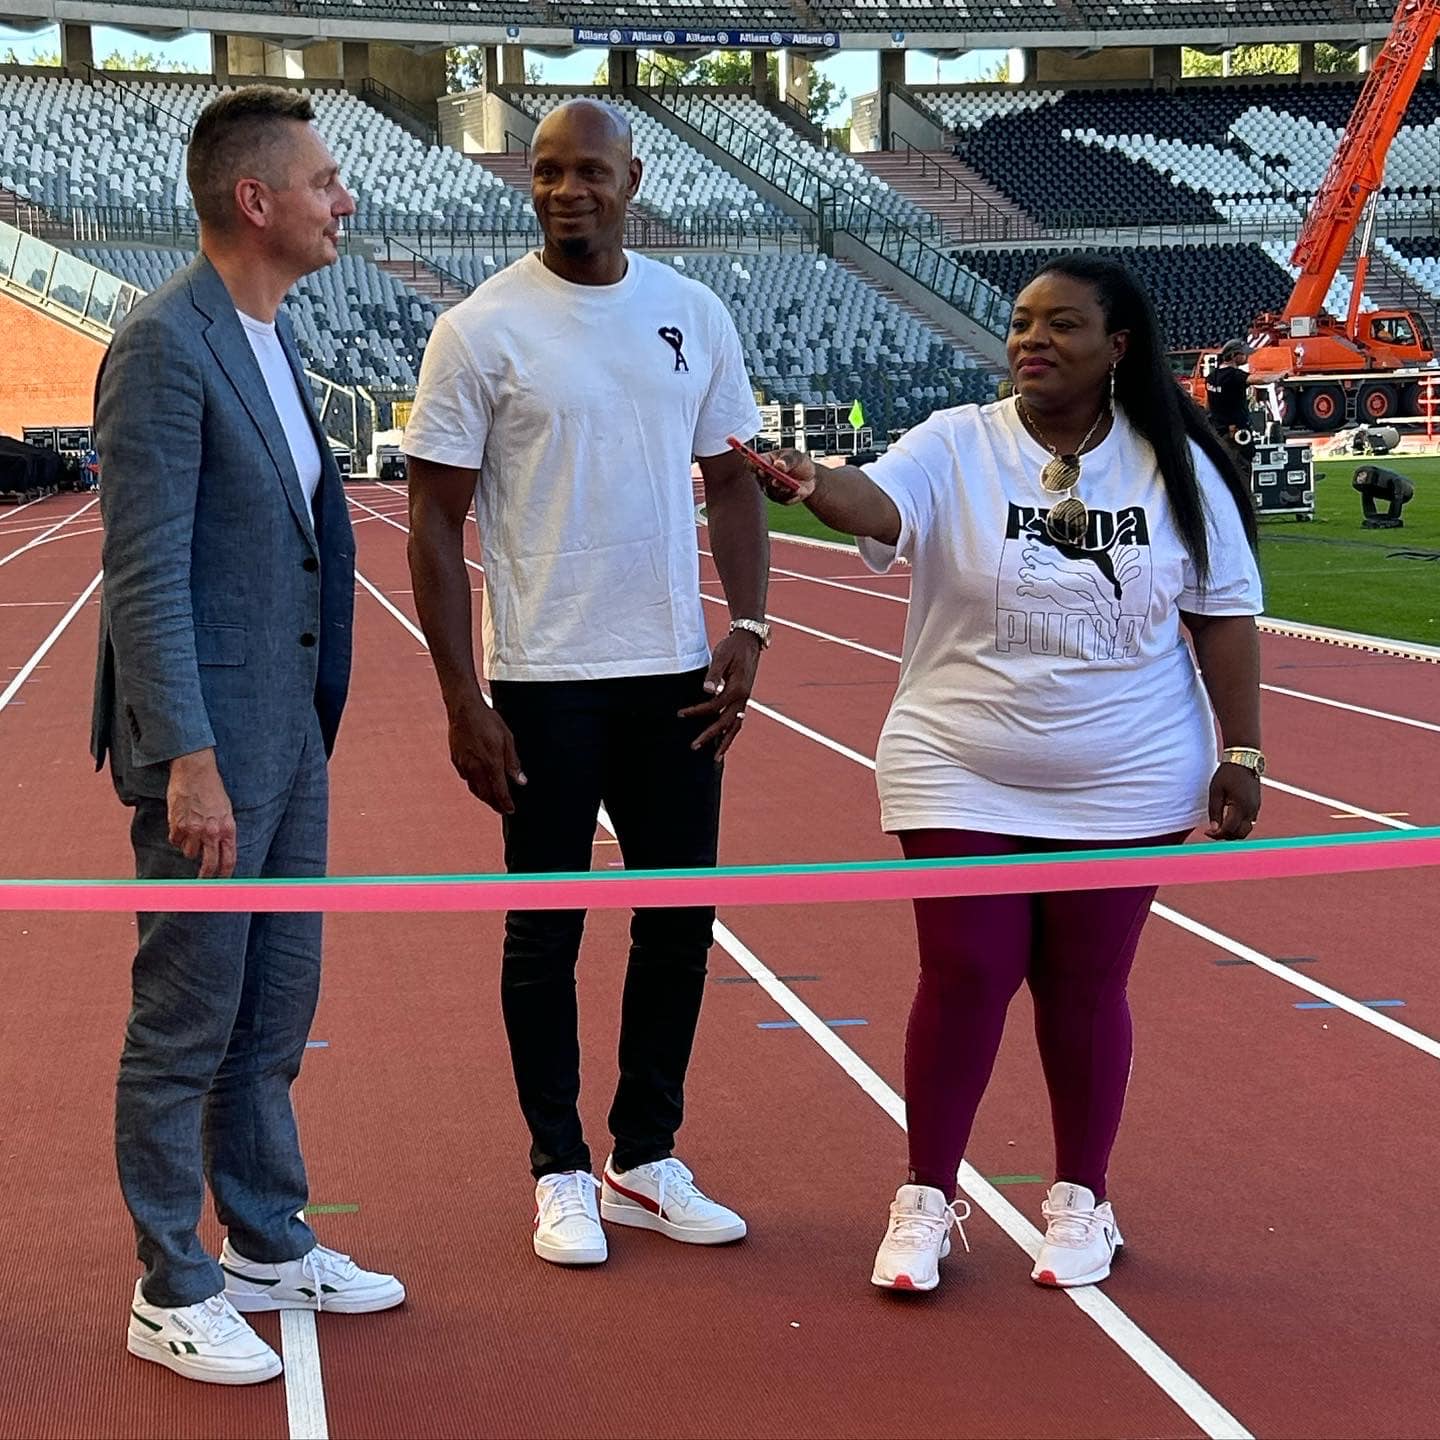 Asafa Powell inaugurates the revamped track at King Baudouin Stadium in Brussels, a venue where he's made history with sub-9.90 performances. The stage is set for electrifying races at this weekend's Allianz Memorial Van Damme meet - Brussels Diamond League